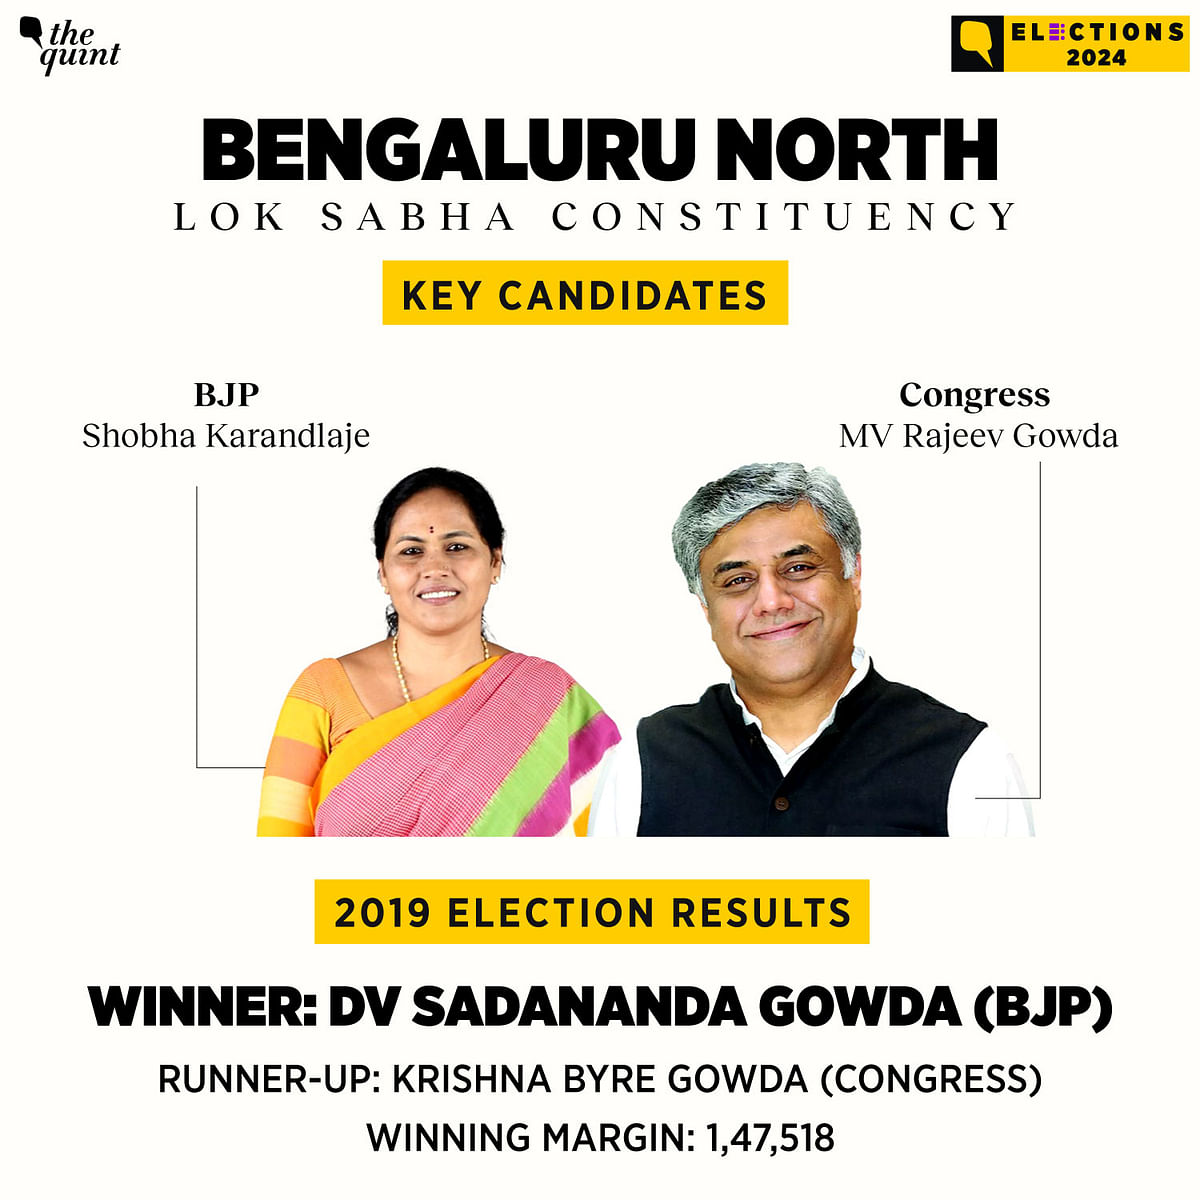 For nearly two decades, the BJP has dominated three of the four Lok Sabha seats across Bengaluru.